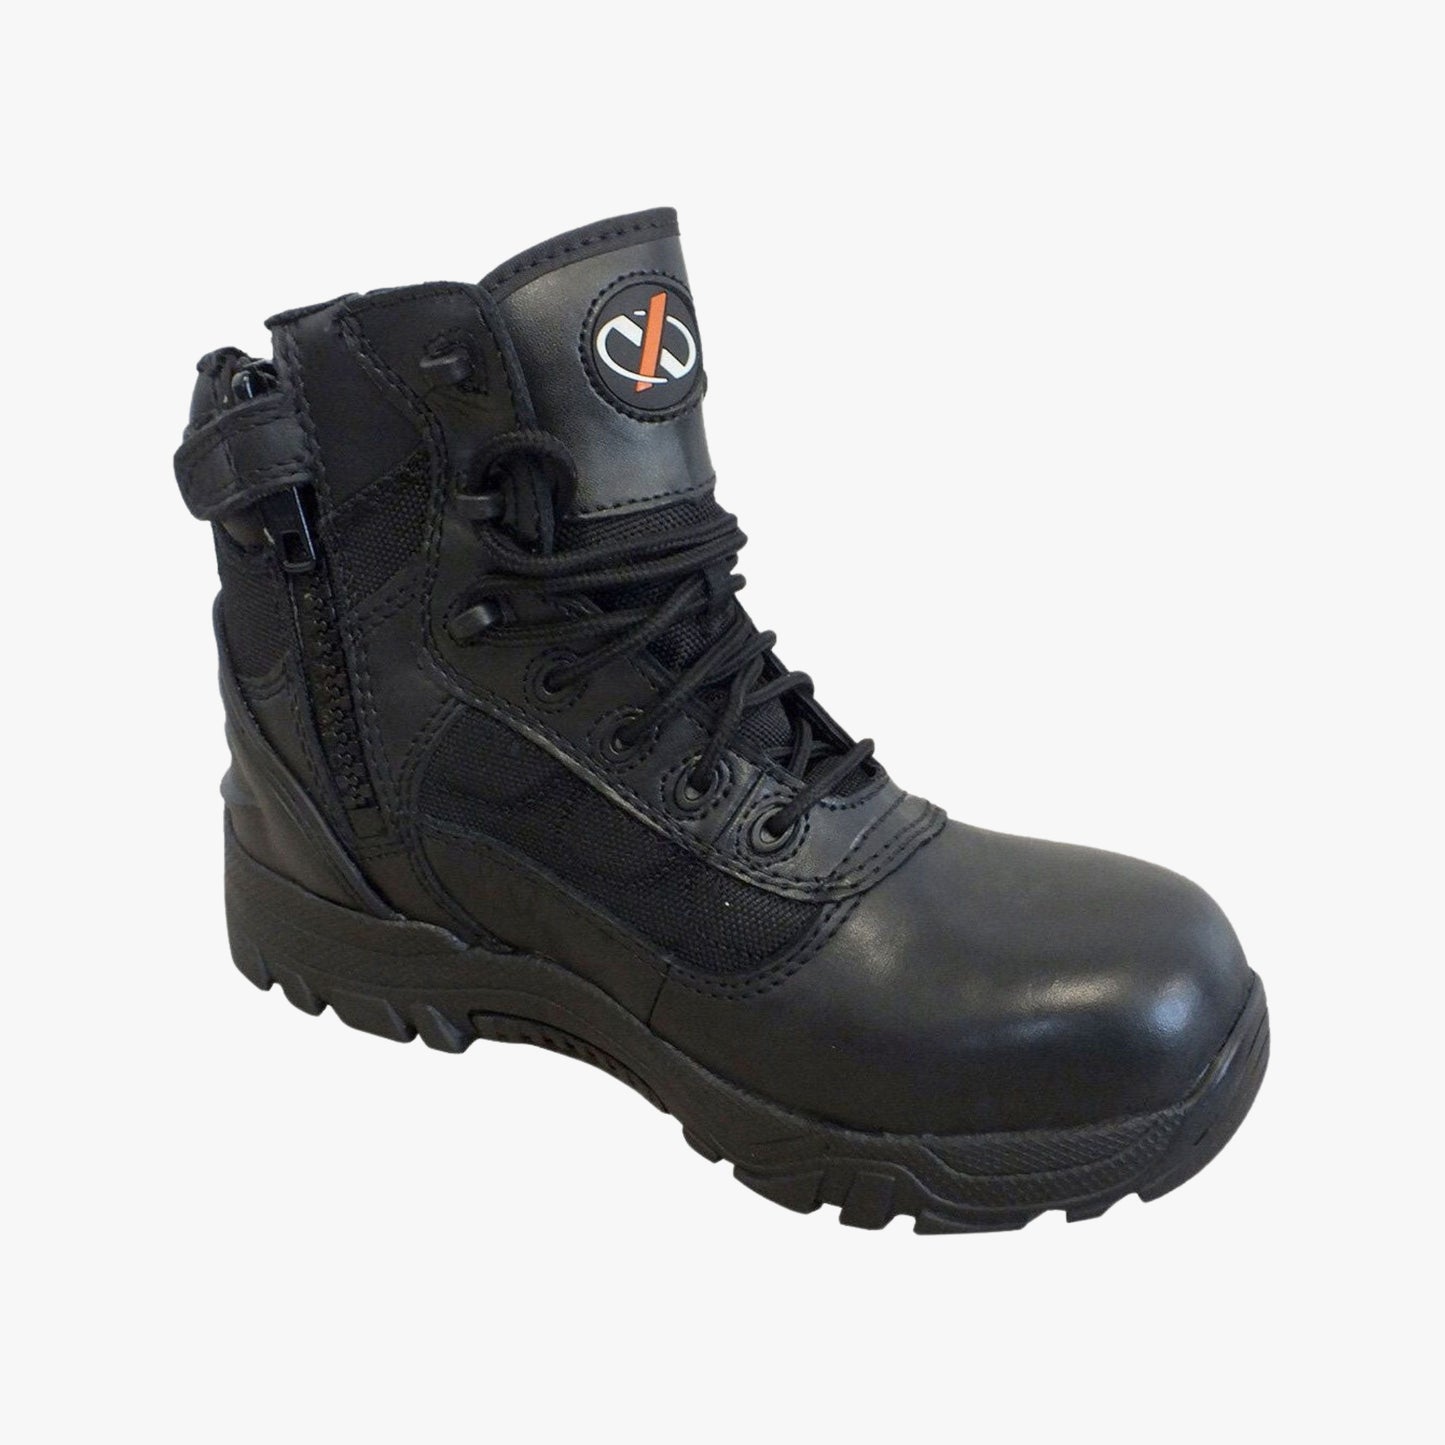 FRONTLINE 2020 - Side Zip Safety Boot